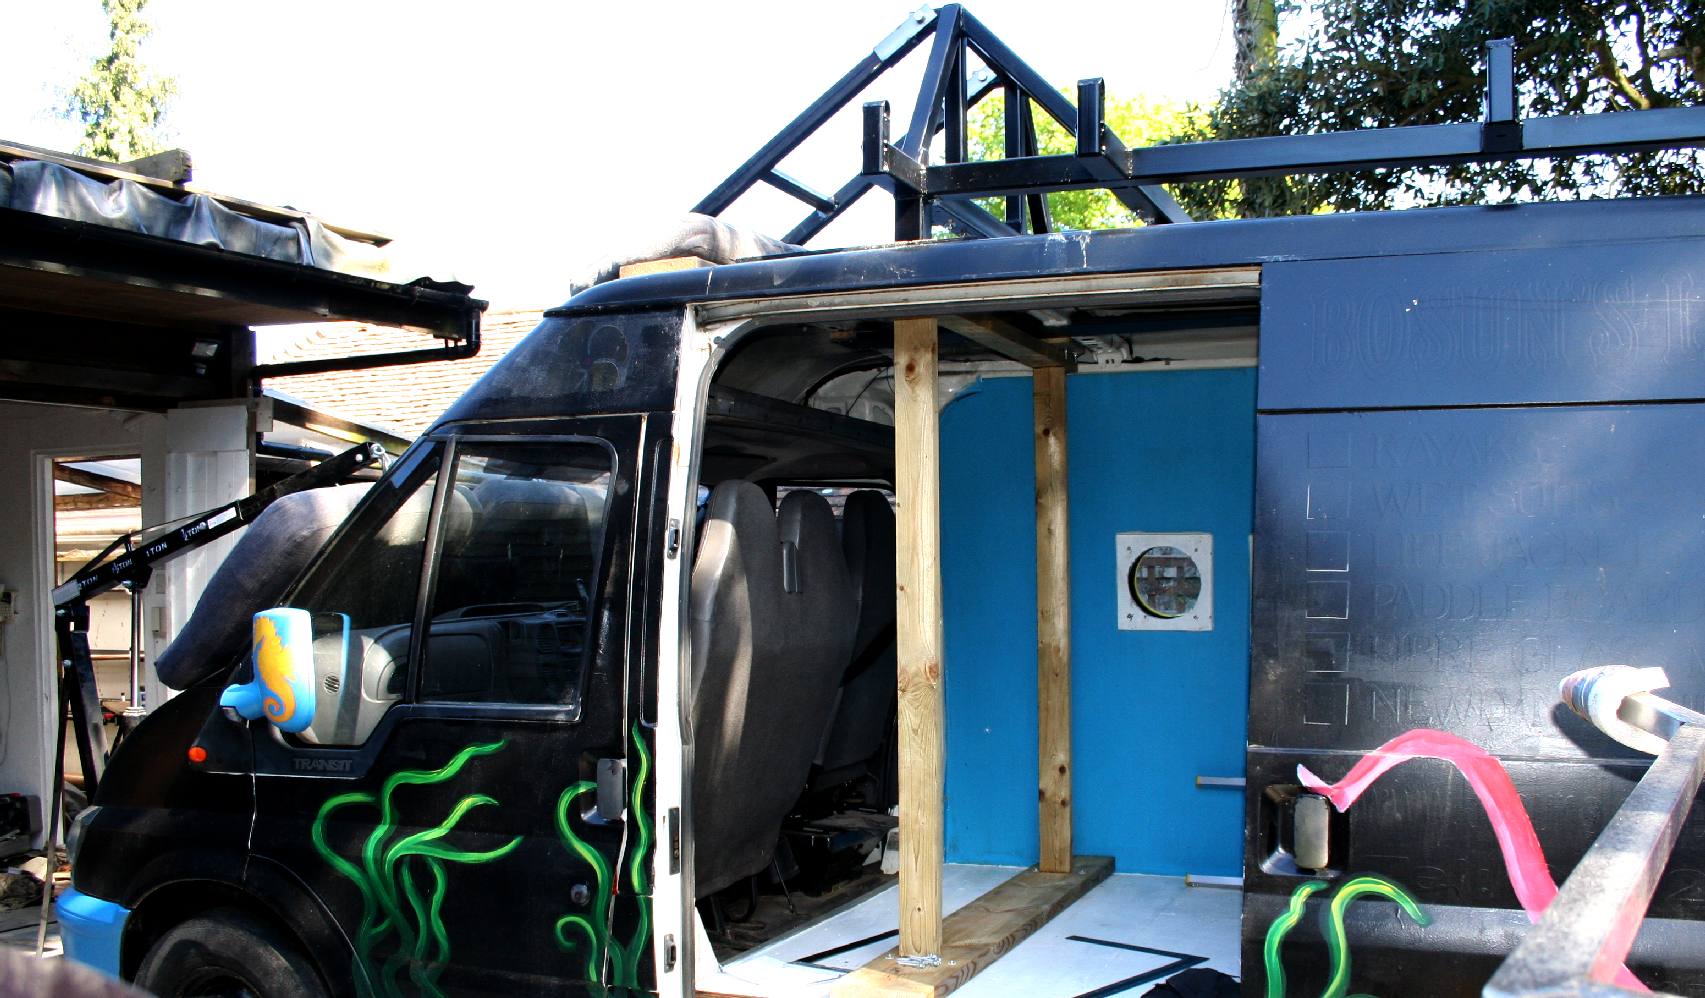 Inside the Ford Transit needed reinforcing steel and timber frames